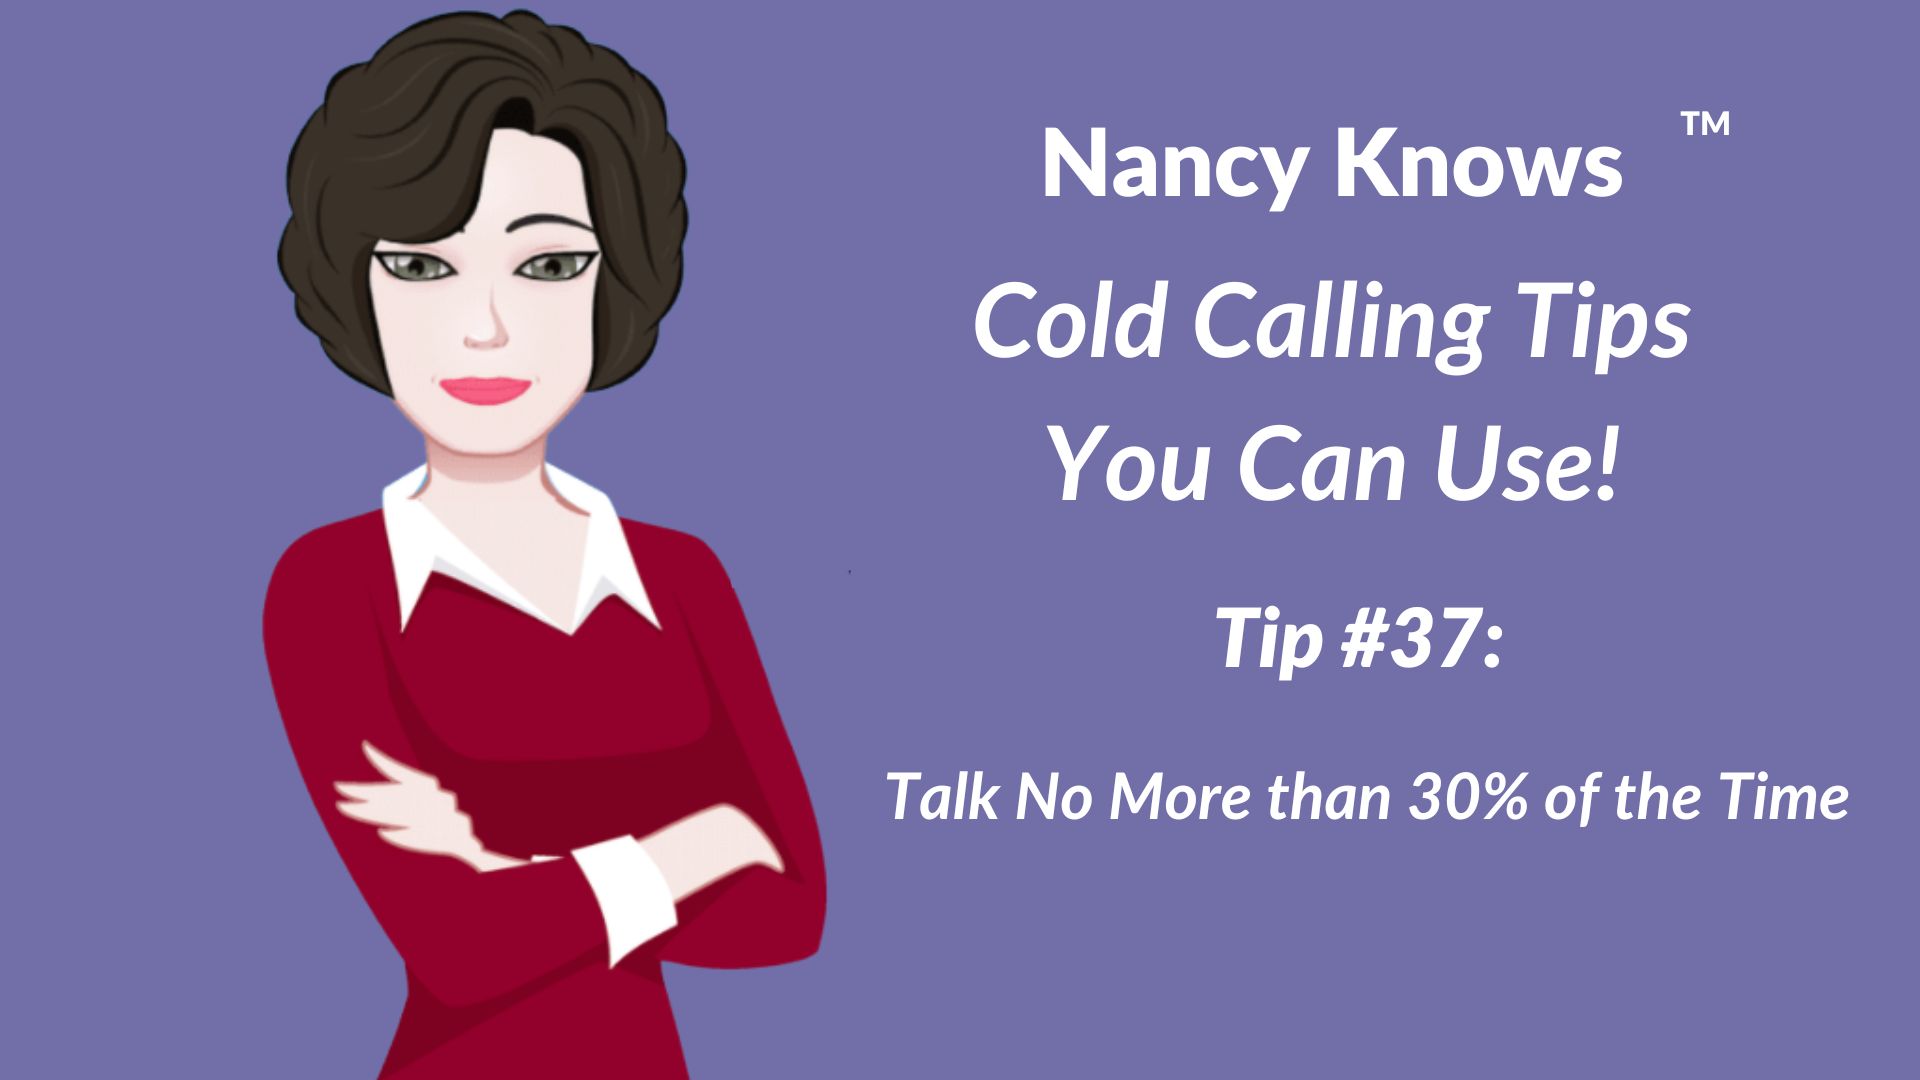 Nancy Knows #37: Talk No More than 30% of the Time